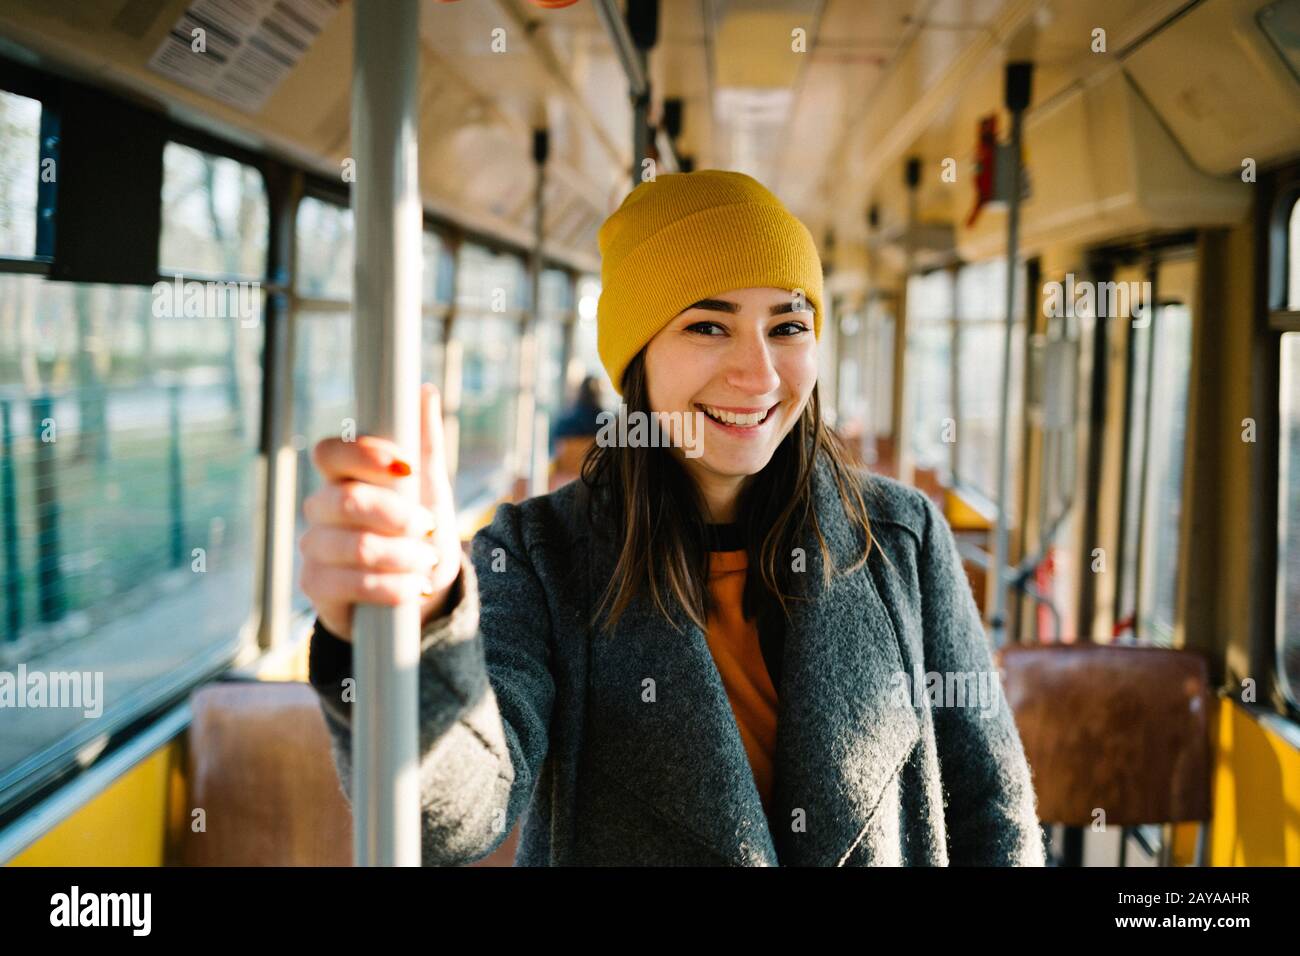 Young woman standing in a wagon of a driving tramway. Transportation, travel and lifestyle concept. Stock Photo